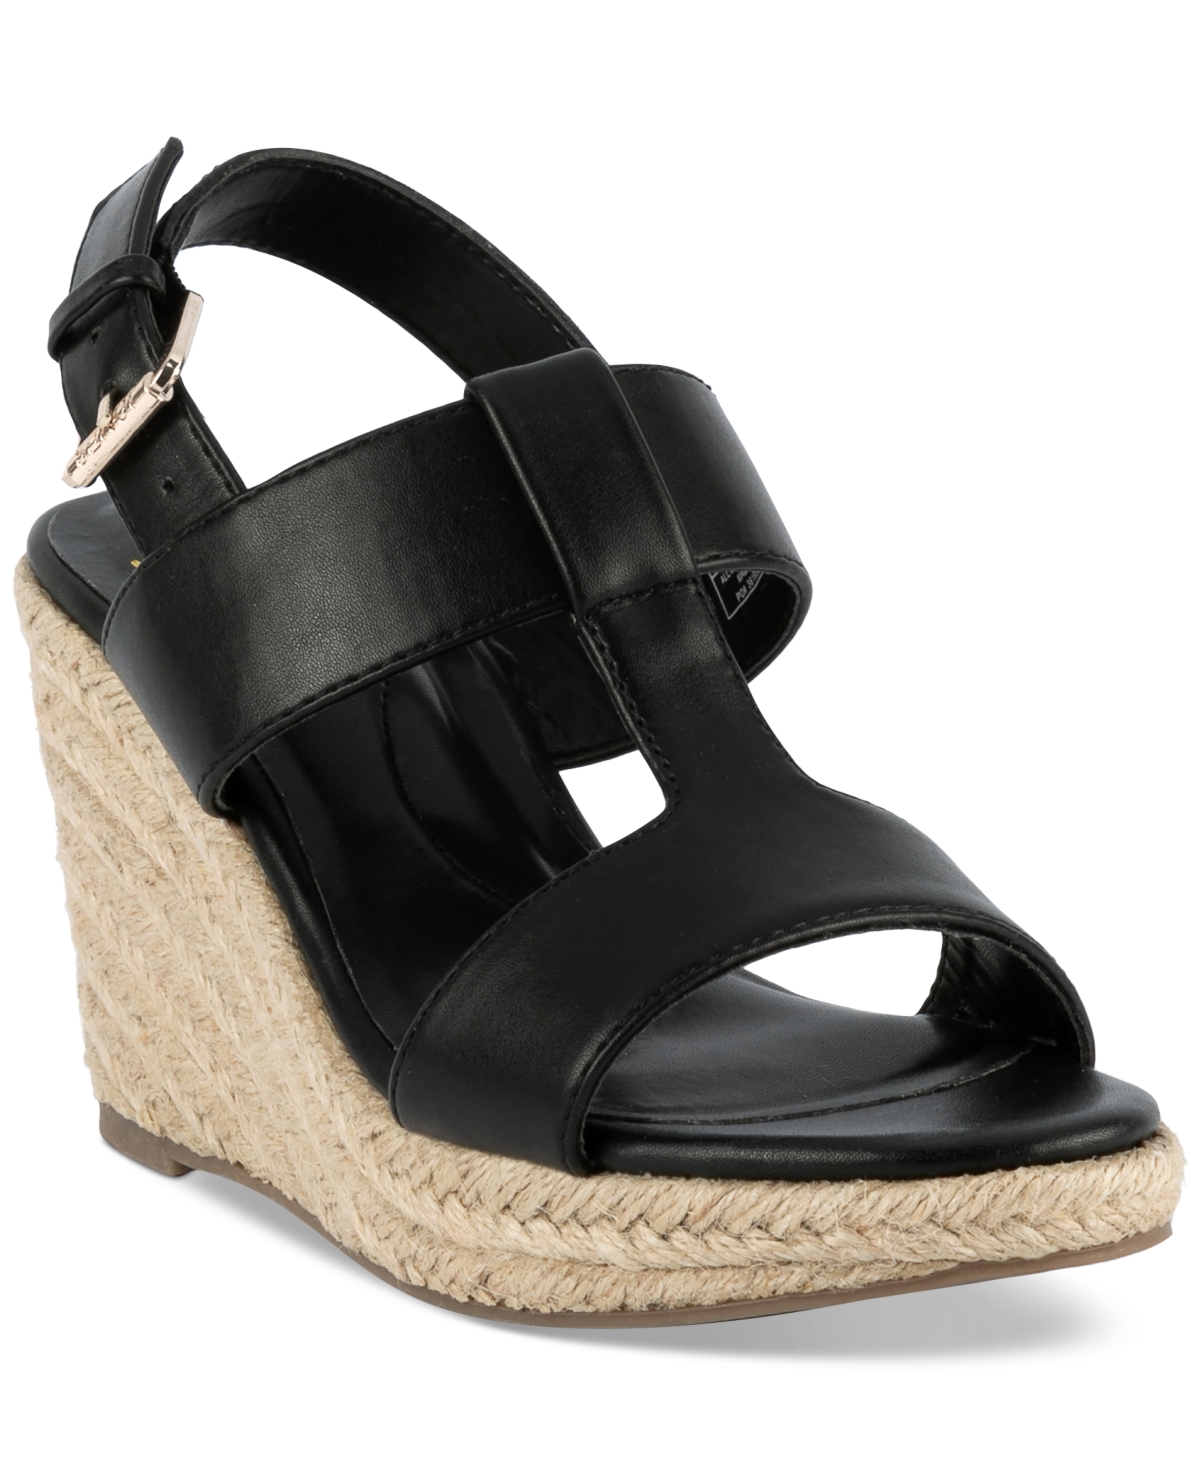 Isortee Strappy Espadrille Wedge Sandals, Created for Macy's - Cognac